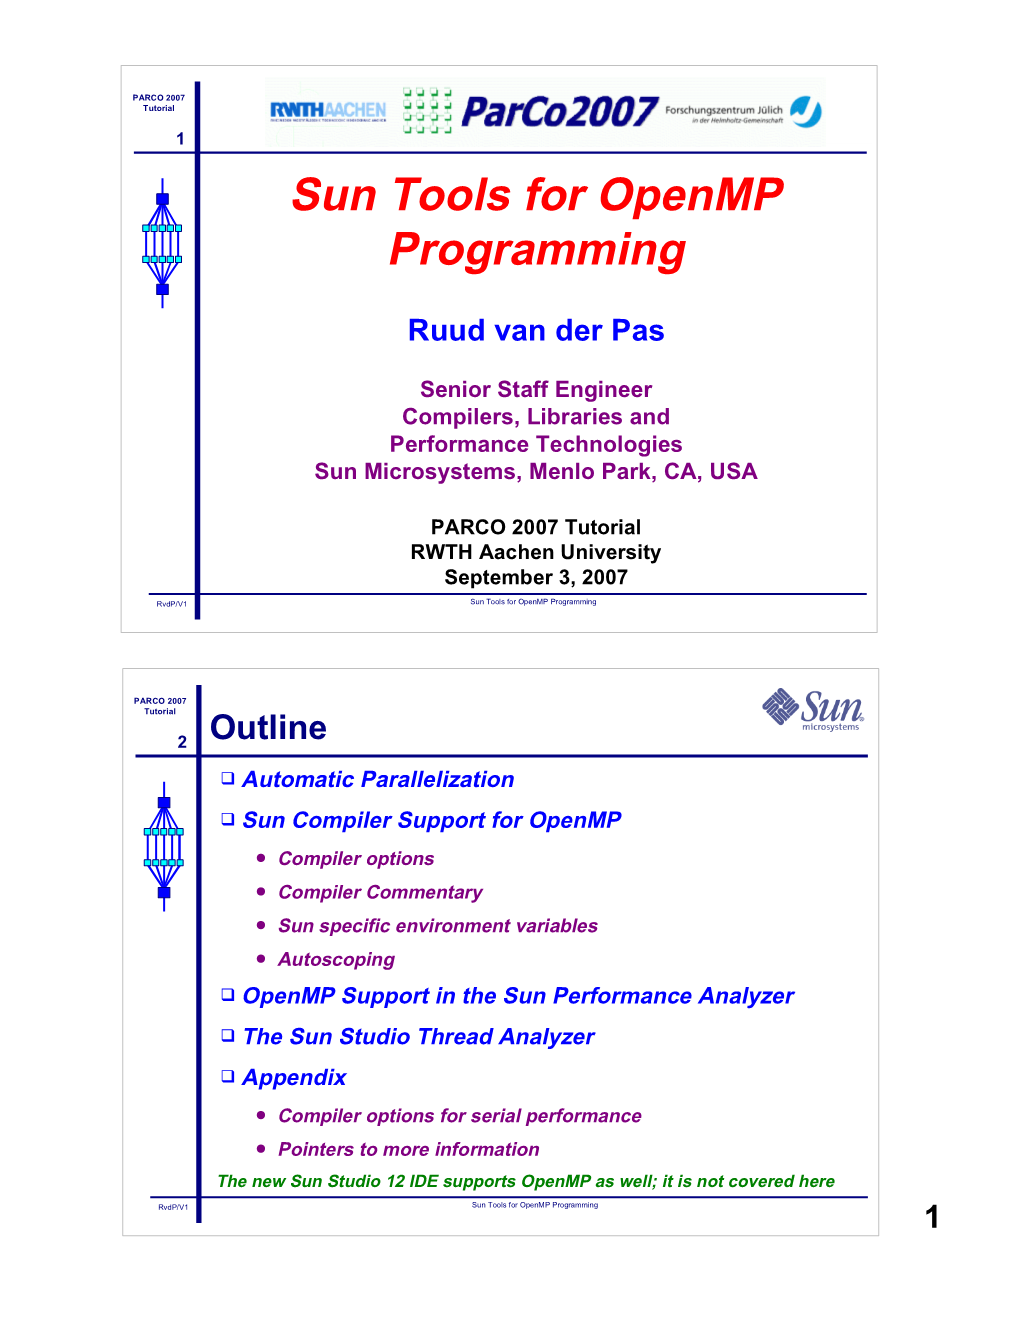 Sun Tools for Openmp Programming